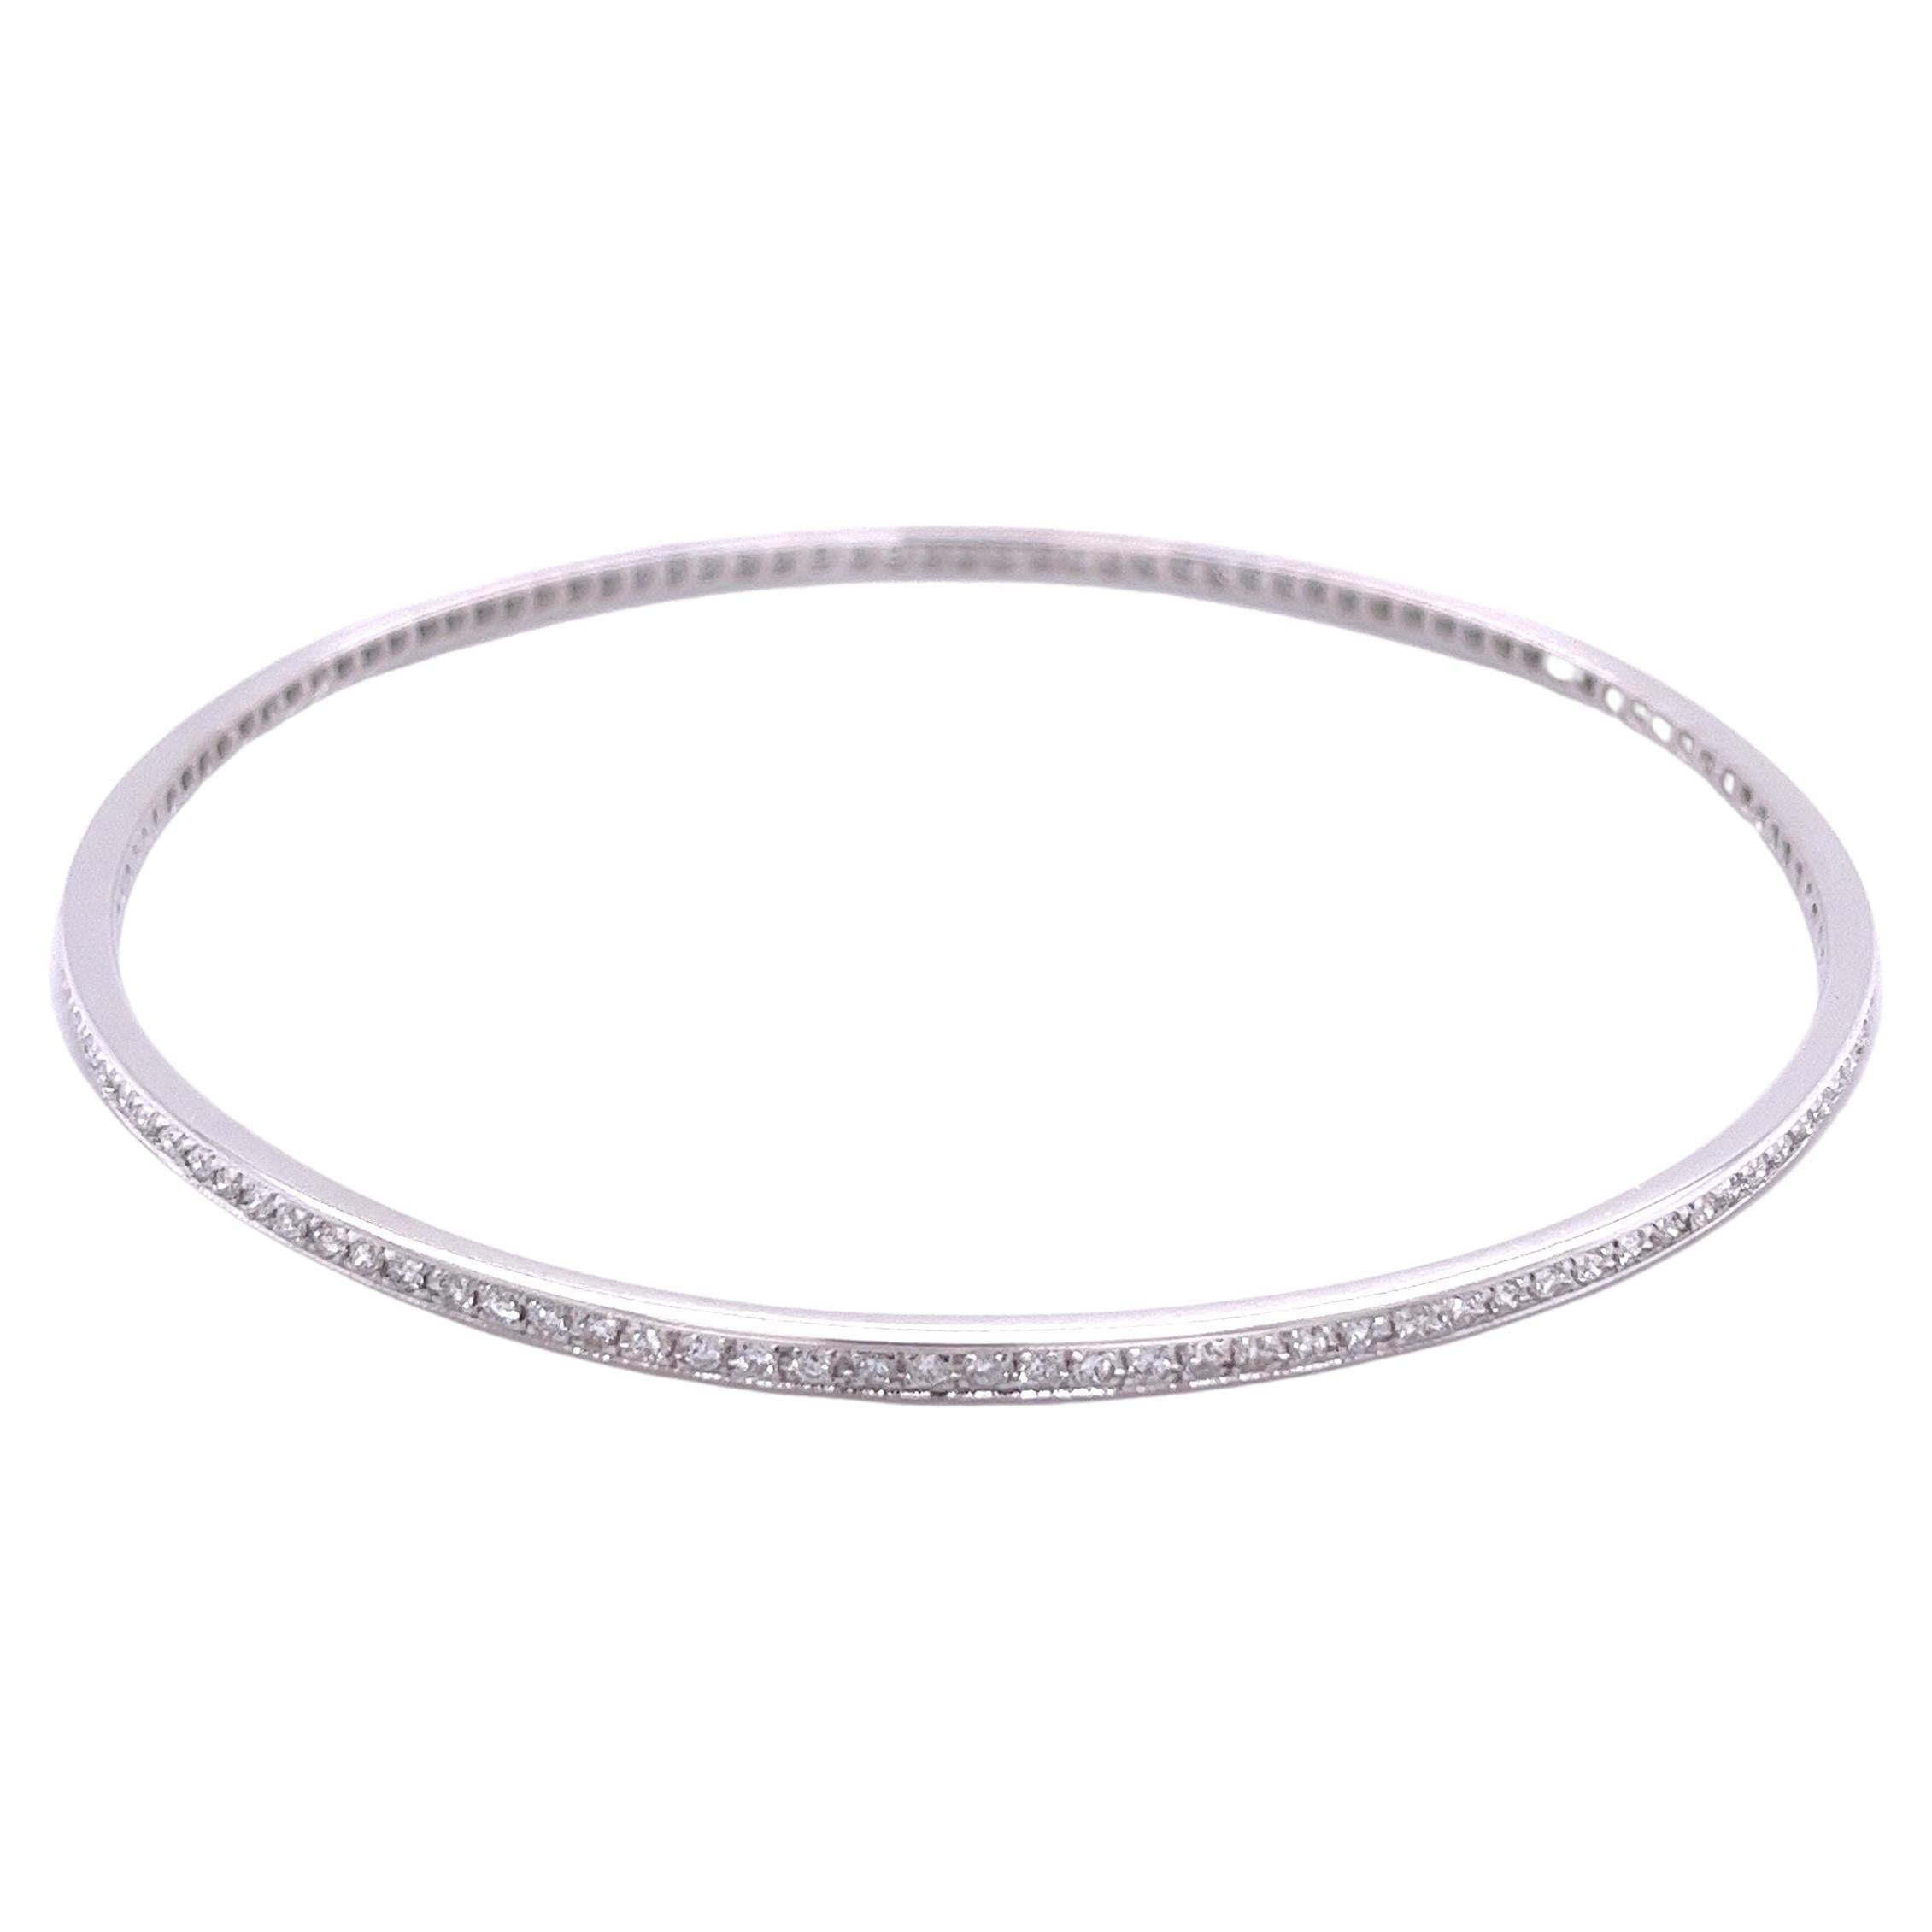 Fred Leighton 3 Carat Round Cut Diamond Bangle in 18k White Gold For Sale